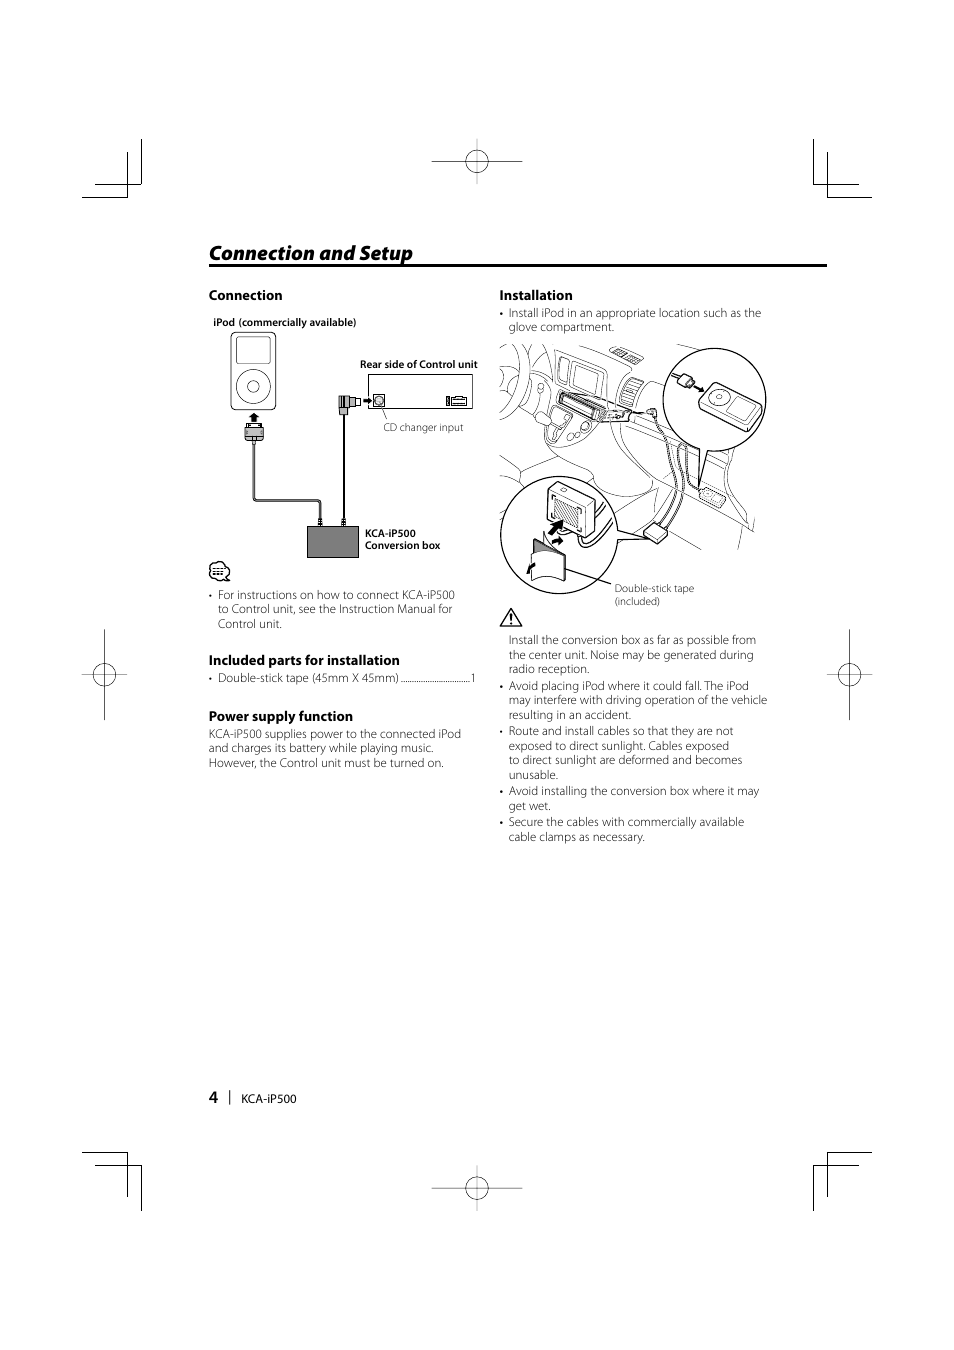 Connection and setup | Kenwood KCA-iP500 User Manual | Page 4 / 84